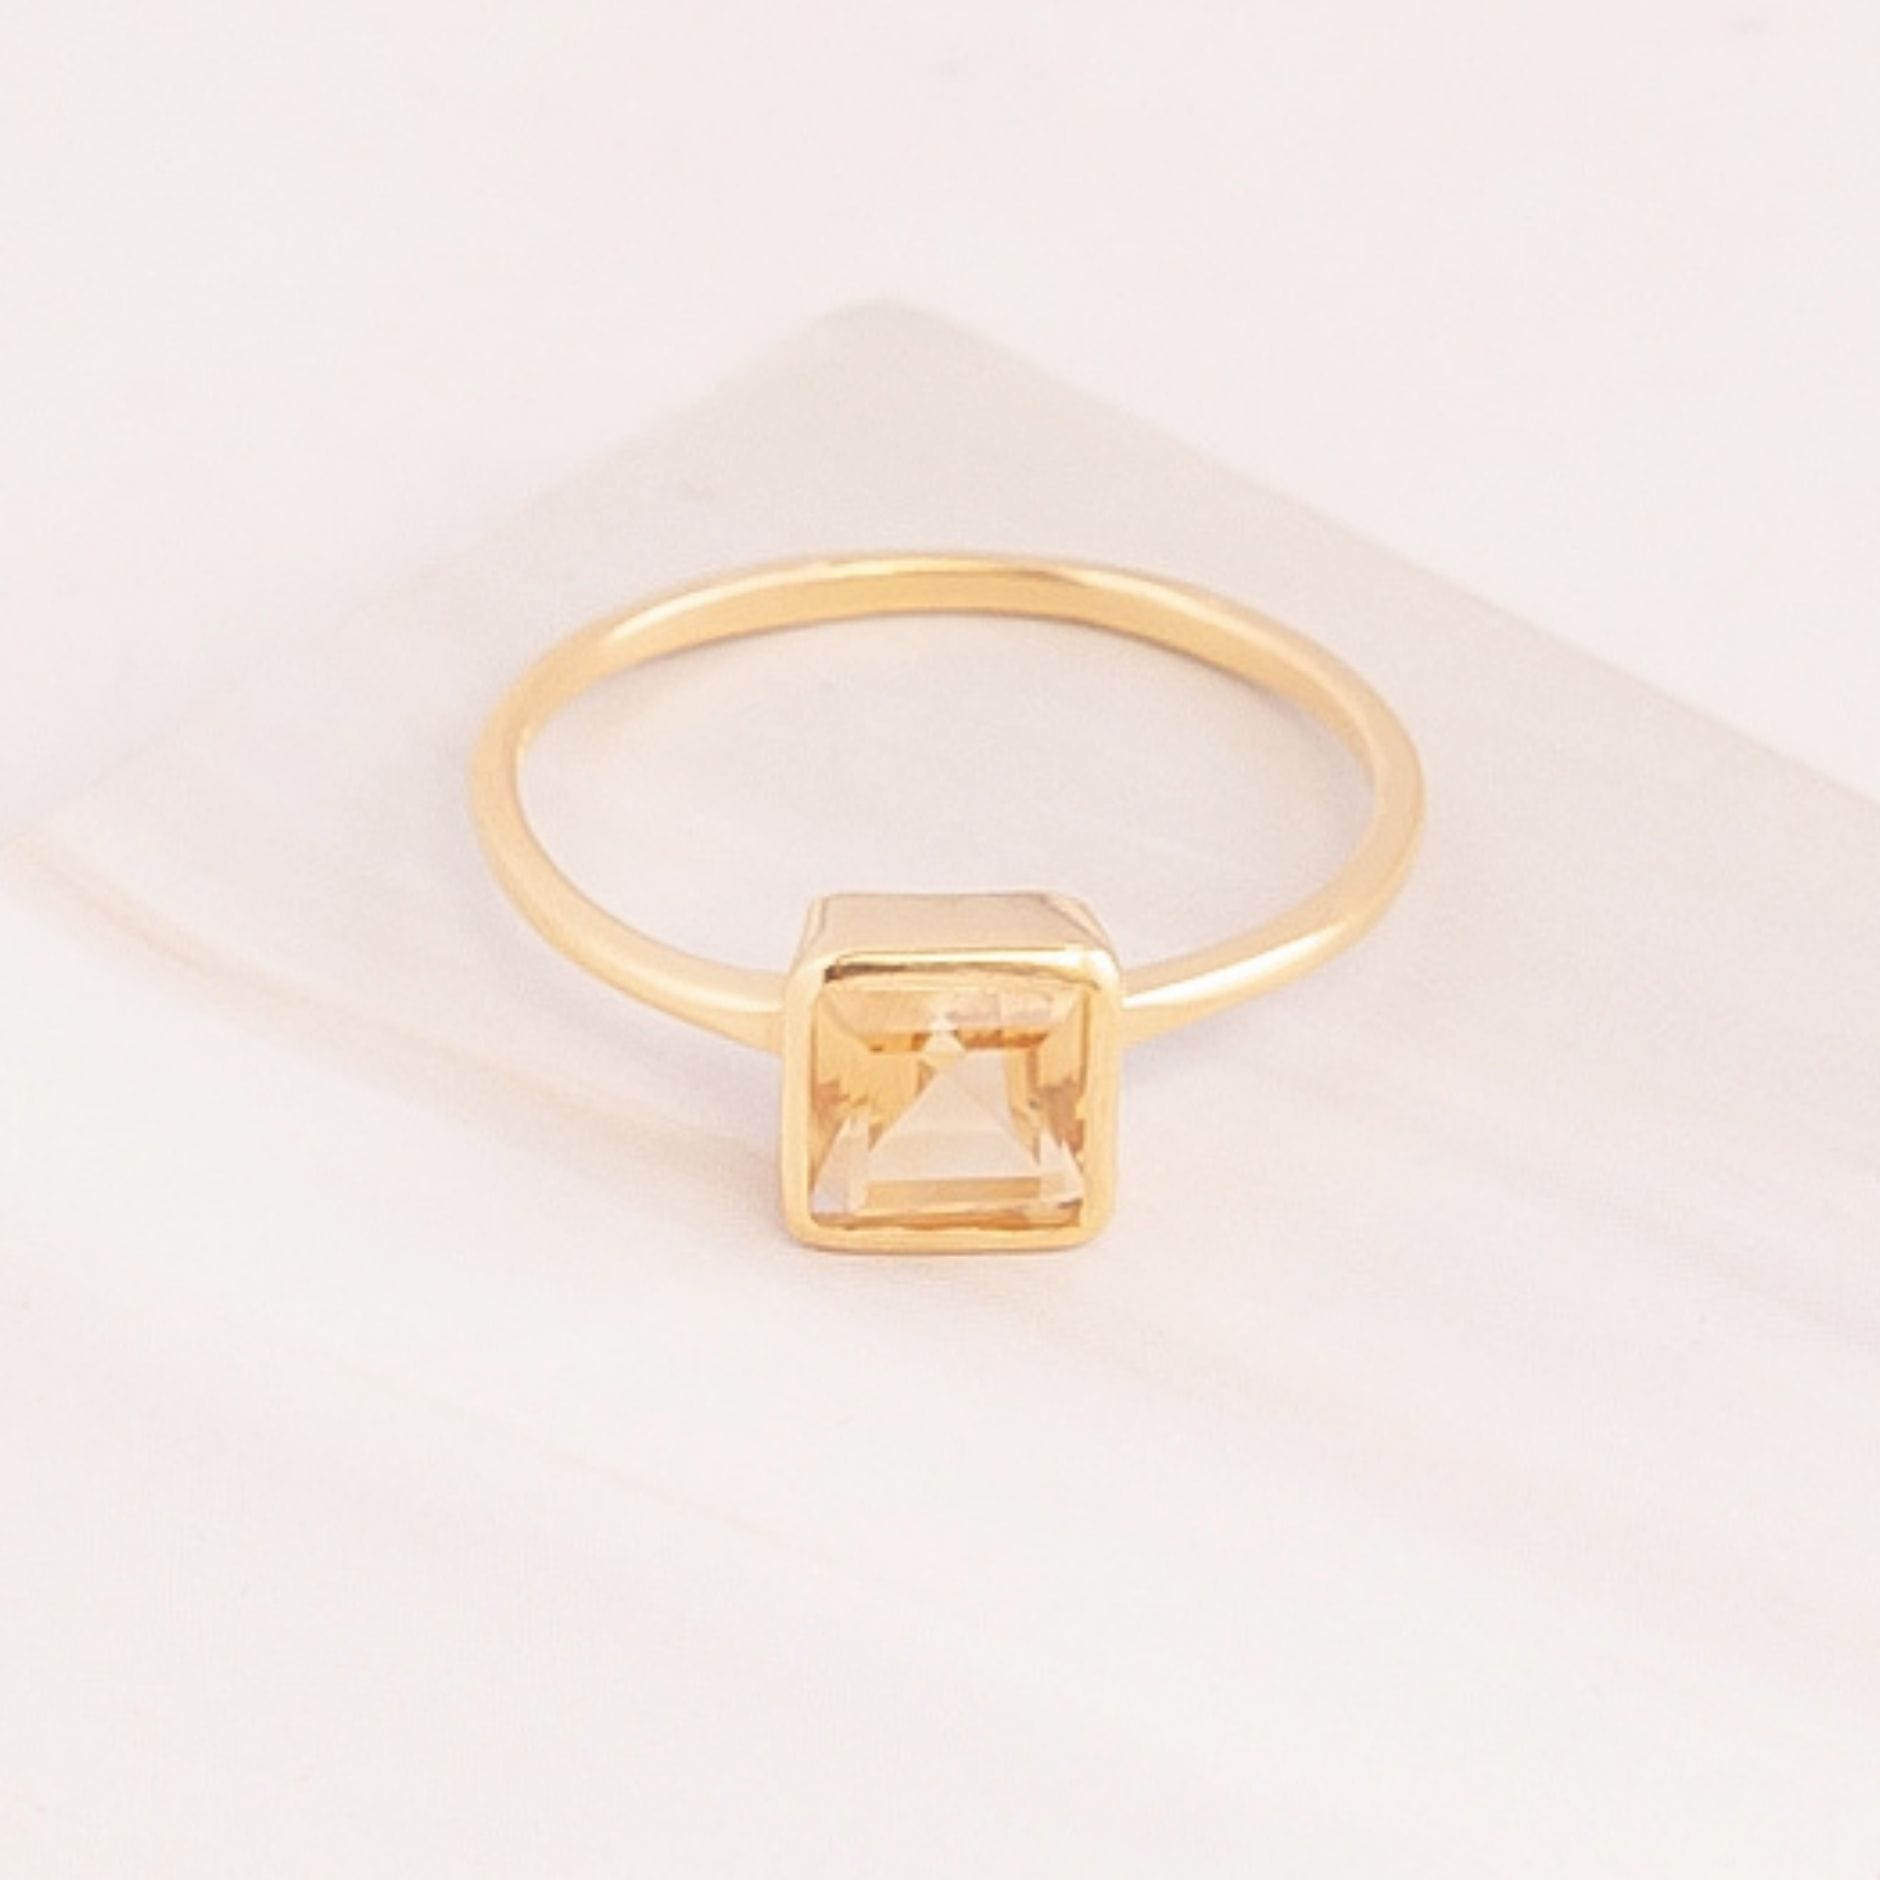 Emblem Jewelry Rings Yellow Citrine / Square Signature Candy Gemstone Stack Rings (Ring Size 9)